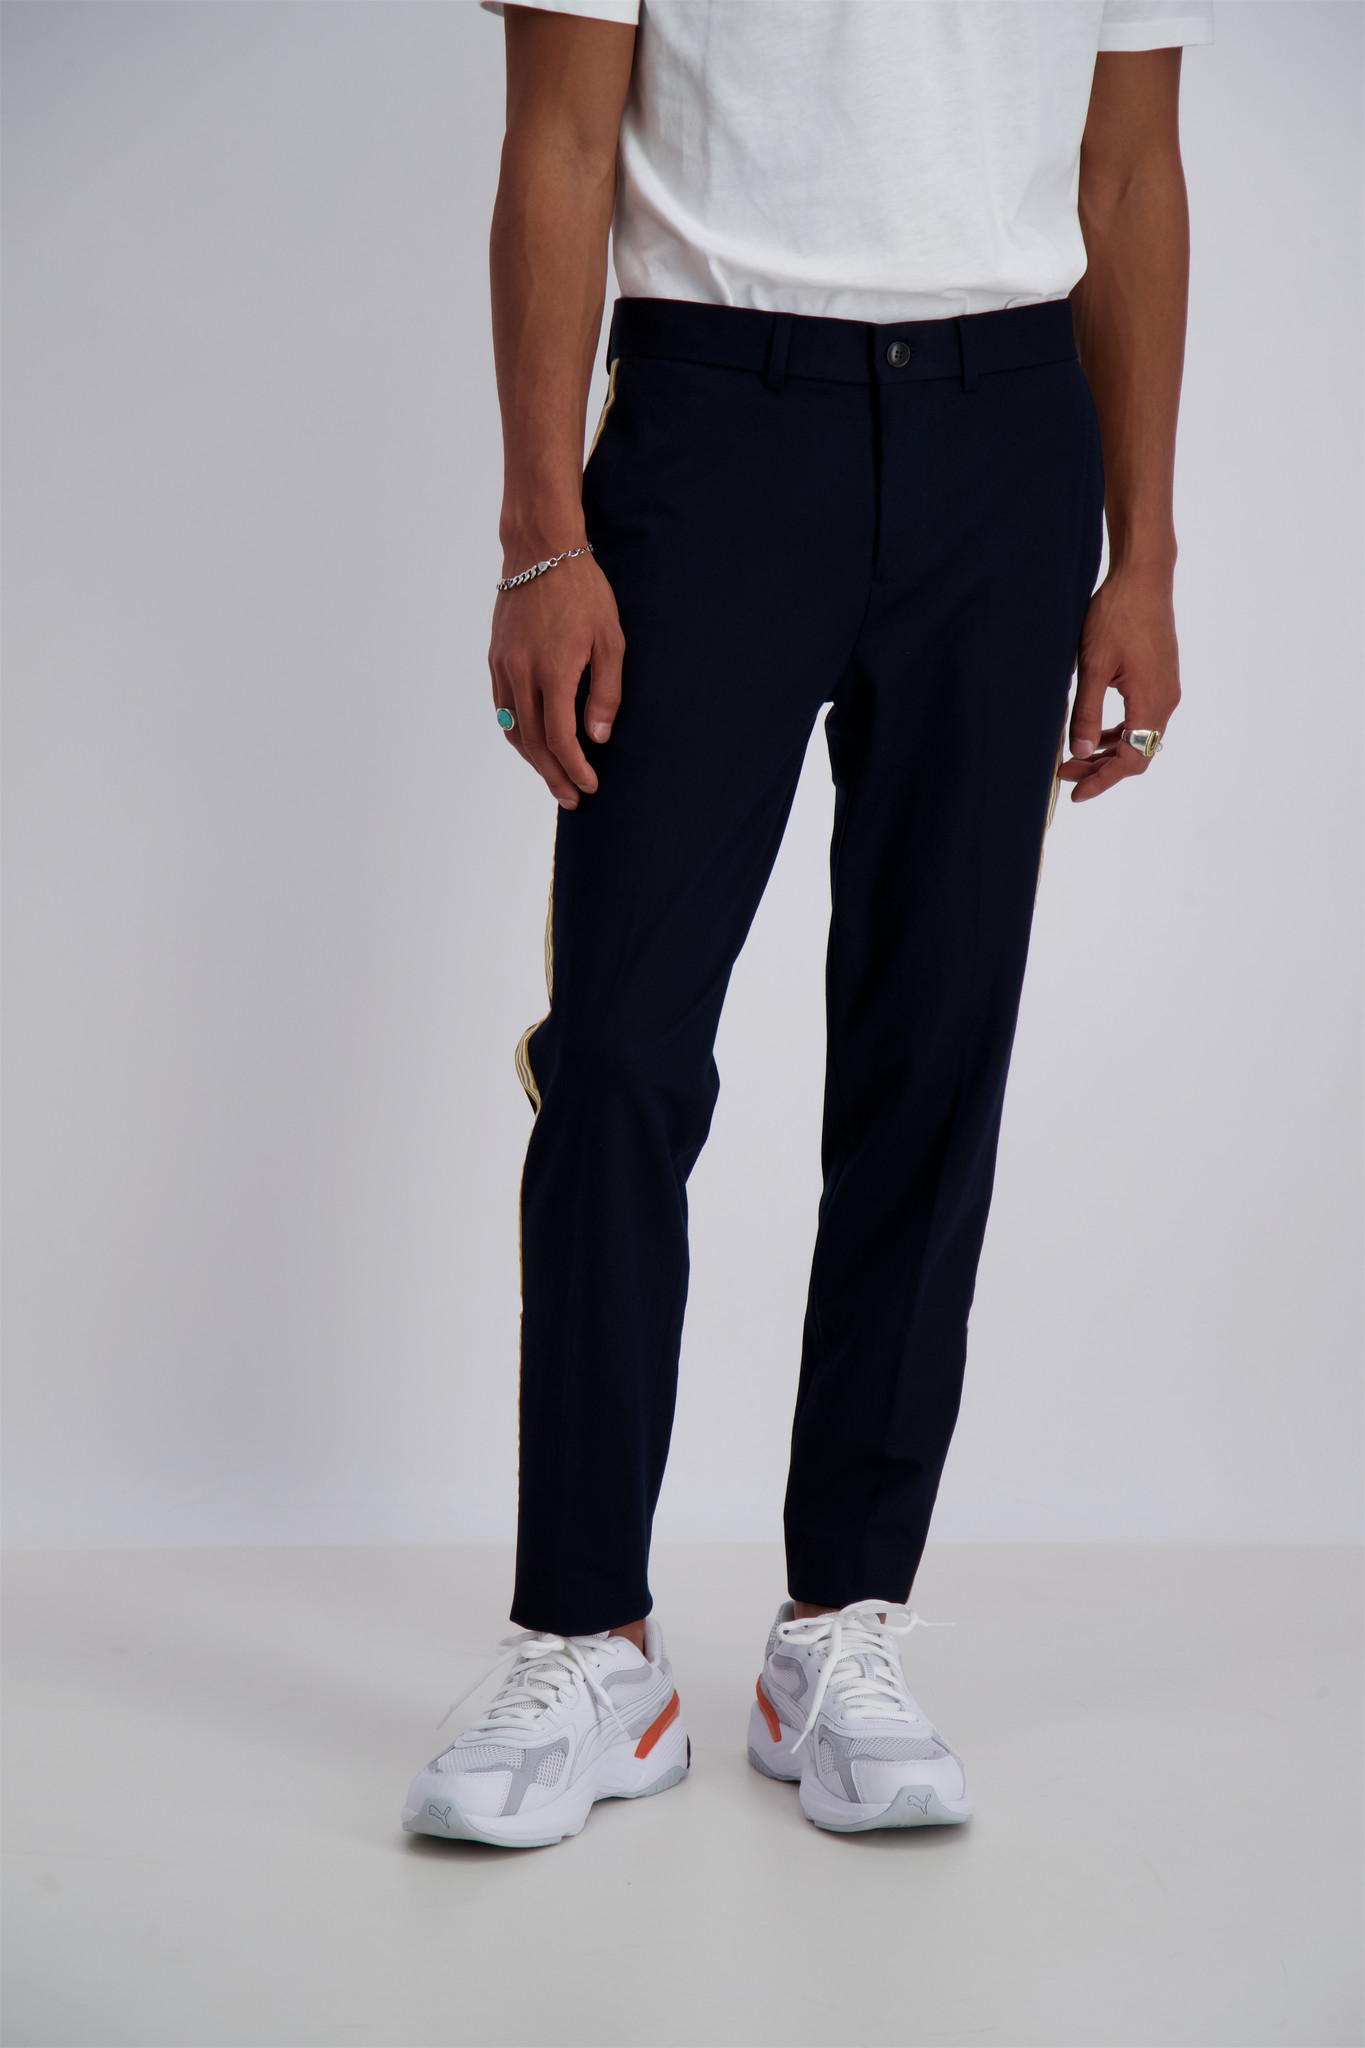 Red Tape Trouser - Buy Red Tape Trousers at Low Price | Myntra